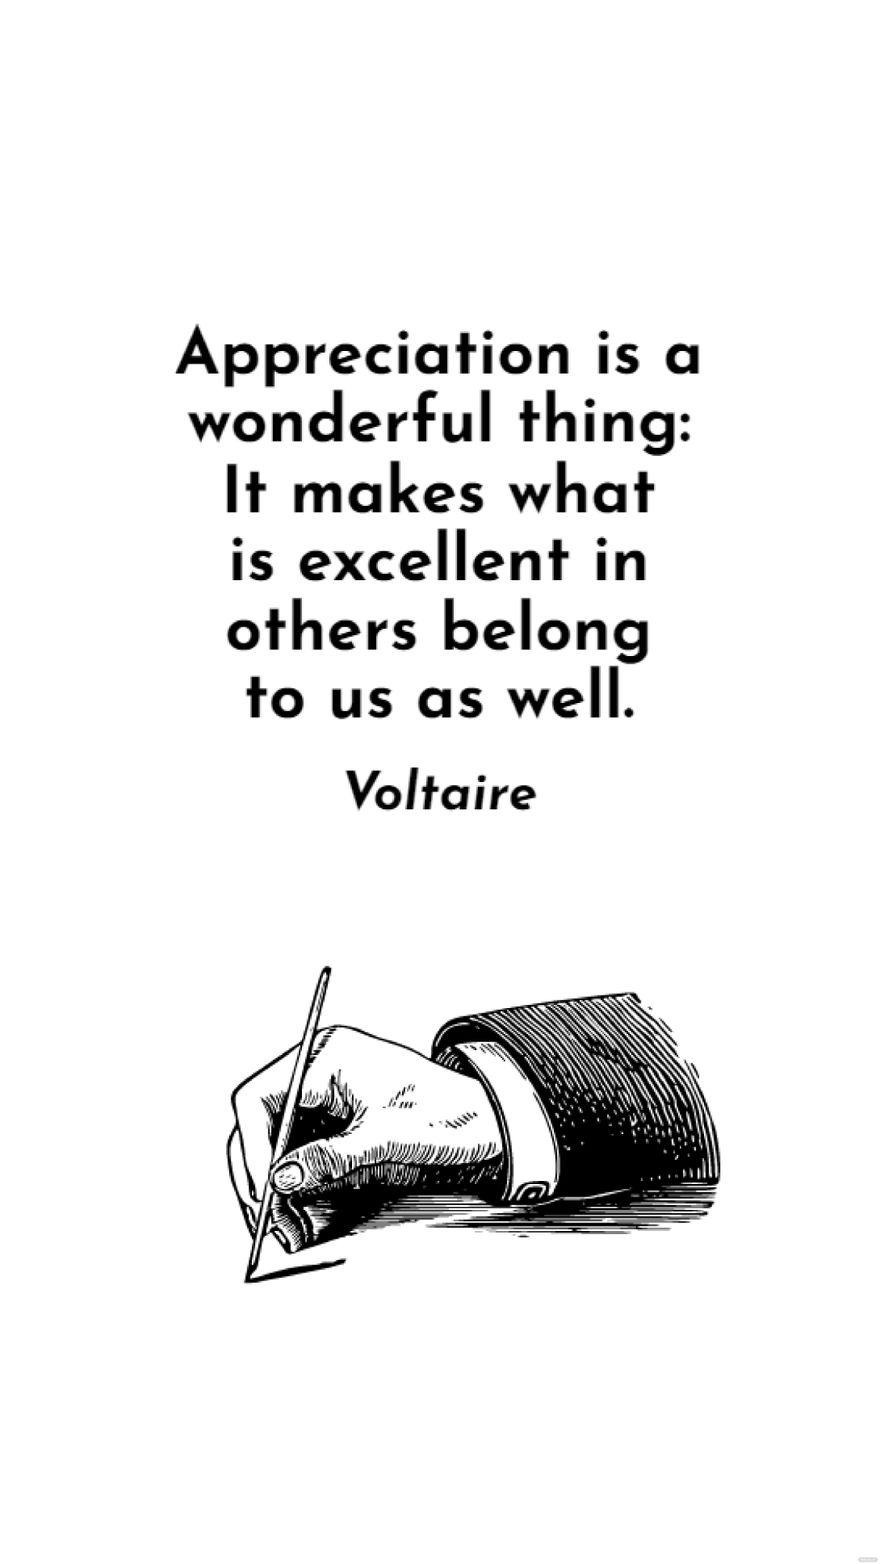 Free Voltaire - Appreciation is a wonderful thing: It makes what is excellent in others belong to us as well. in JPG